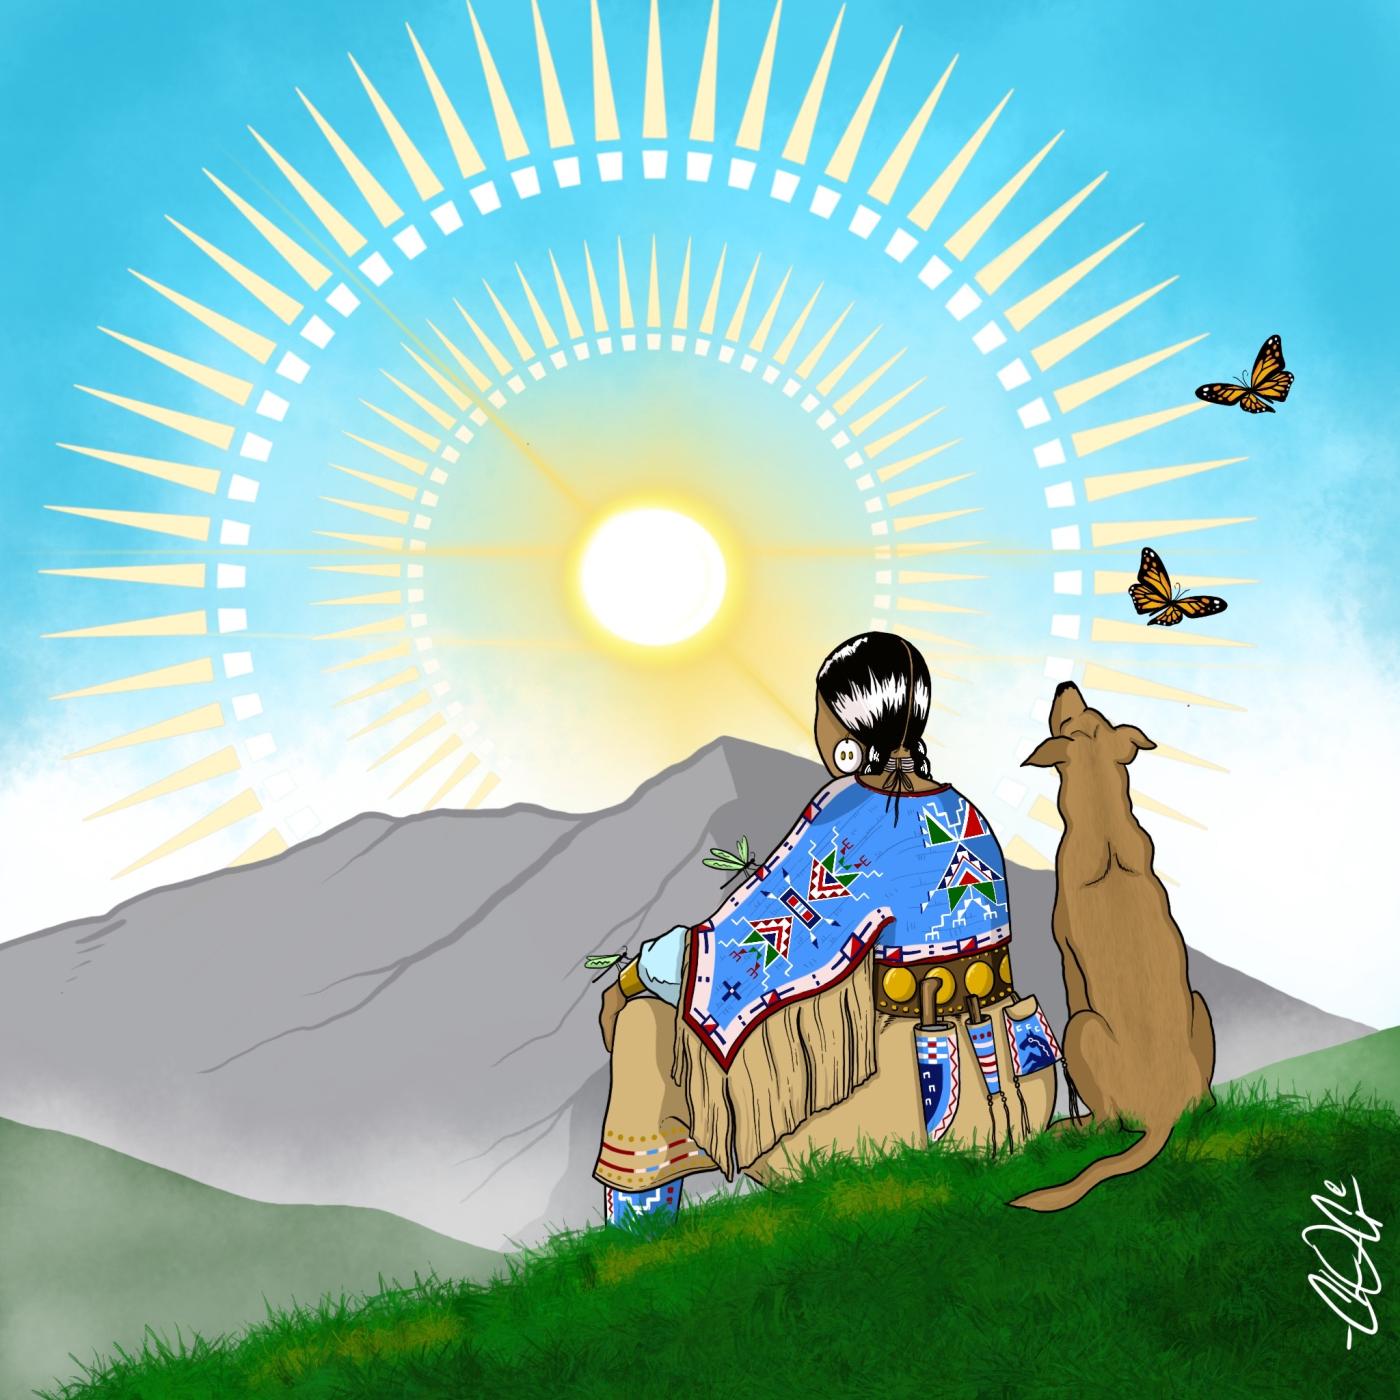 Digital art of young Lakota girl and her dog sitting on the hillside overlooking the mountains while two butterflies flit past. 